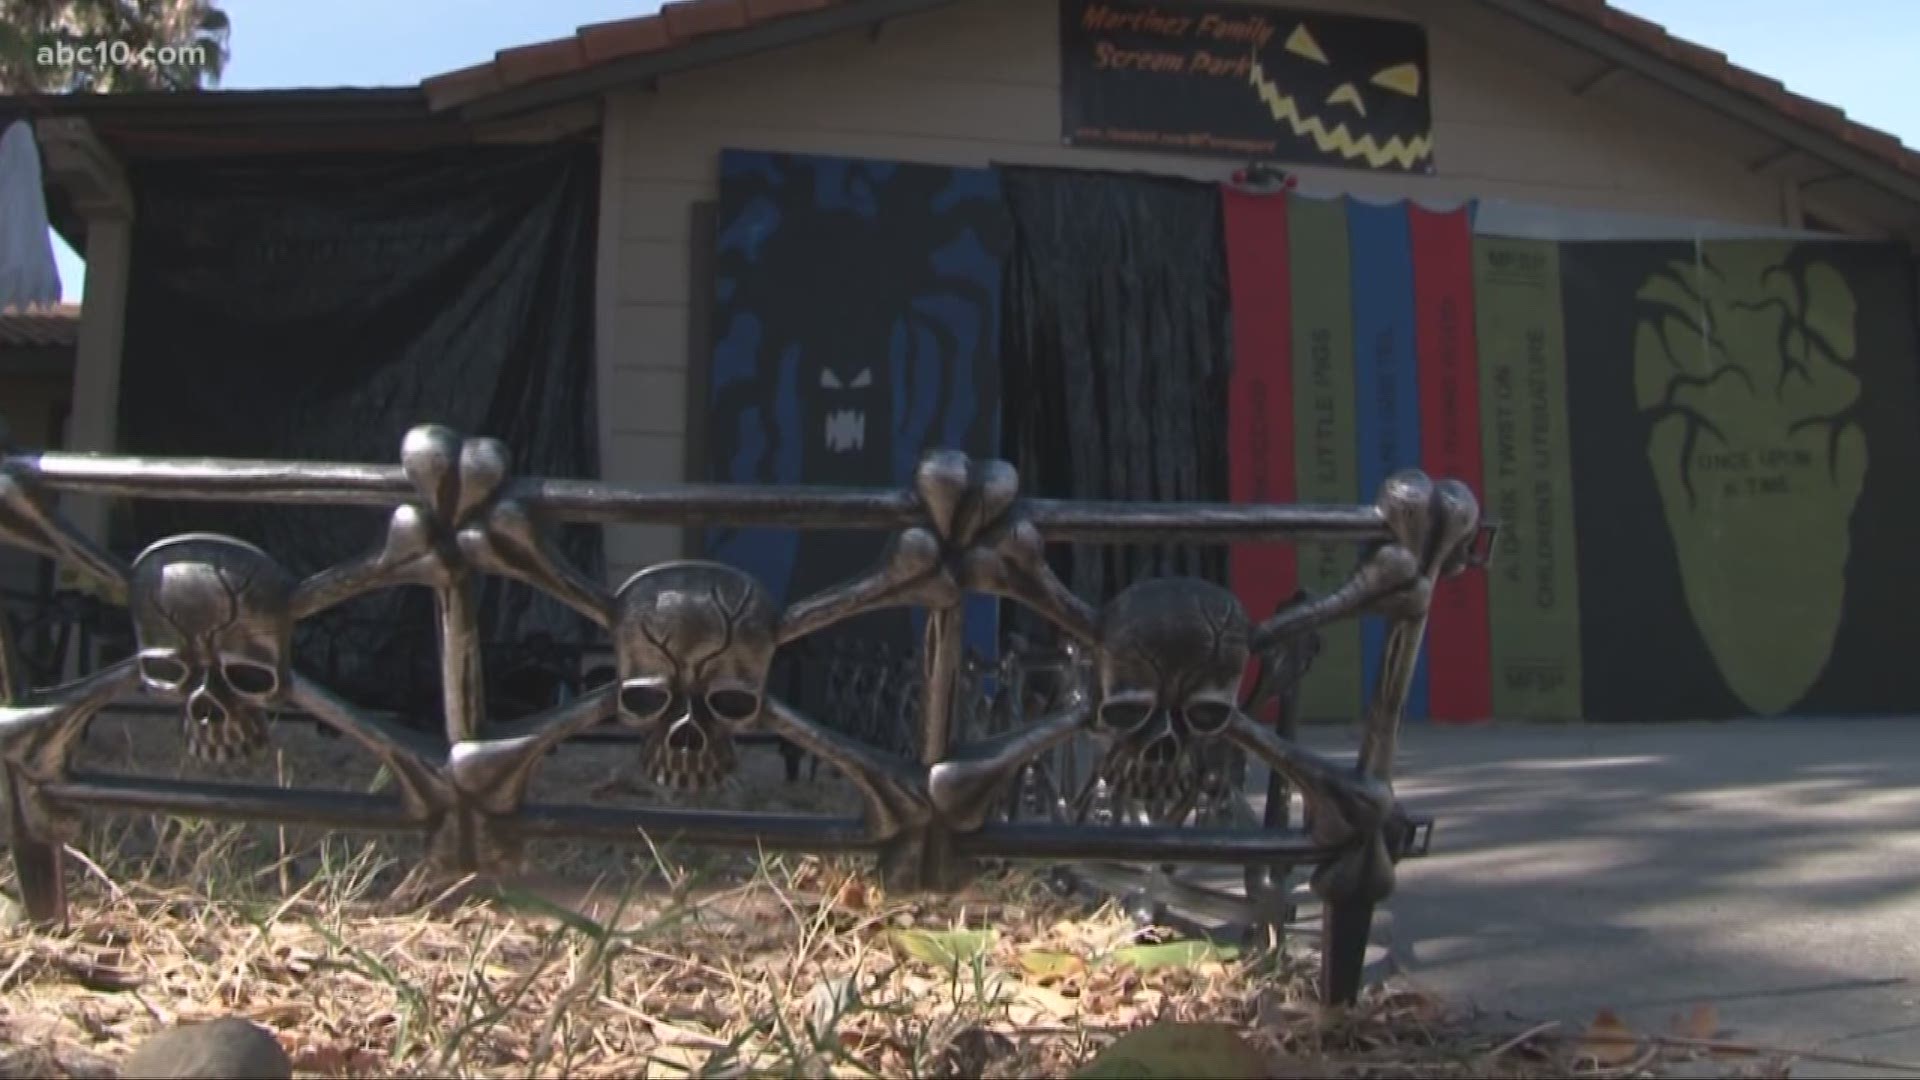 A Stockton family gives back to the community in an unusual way on Halloween.